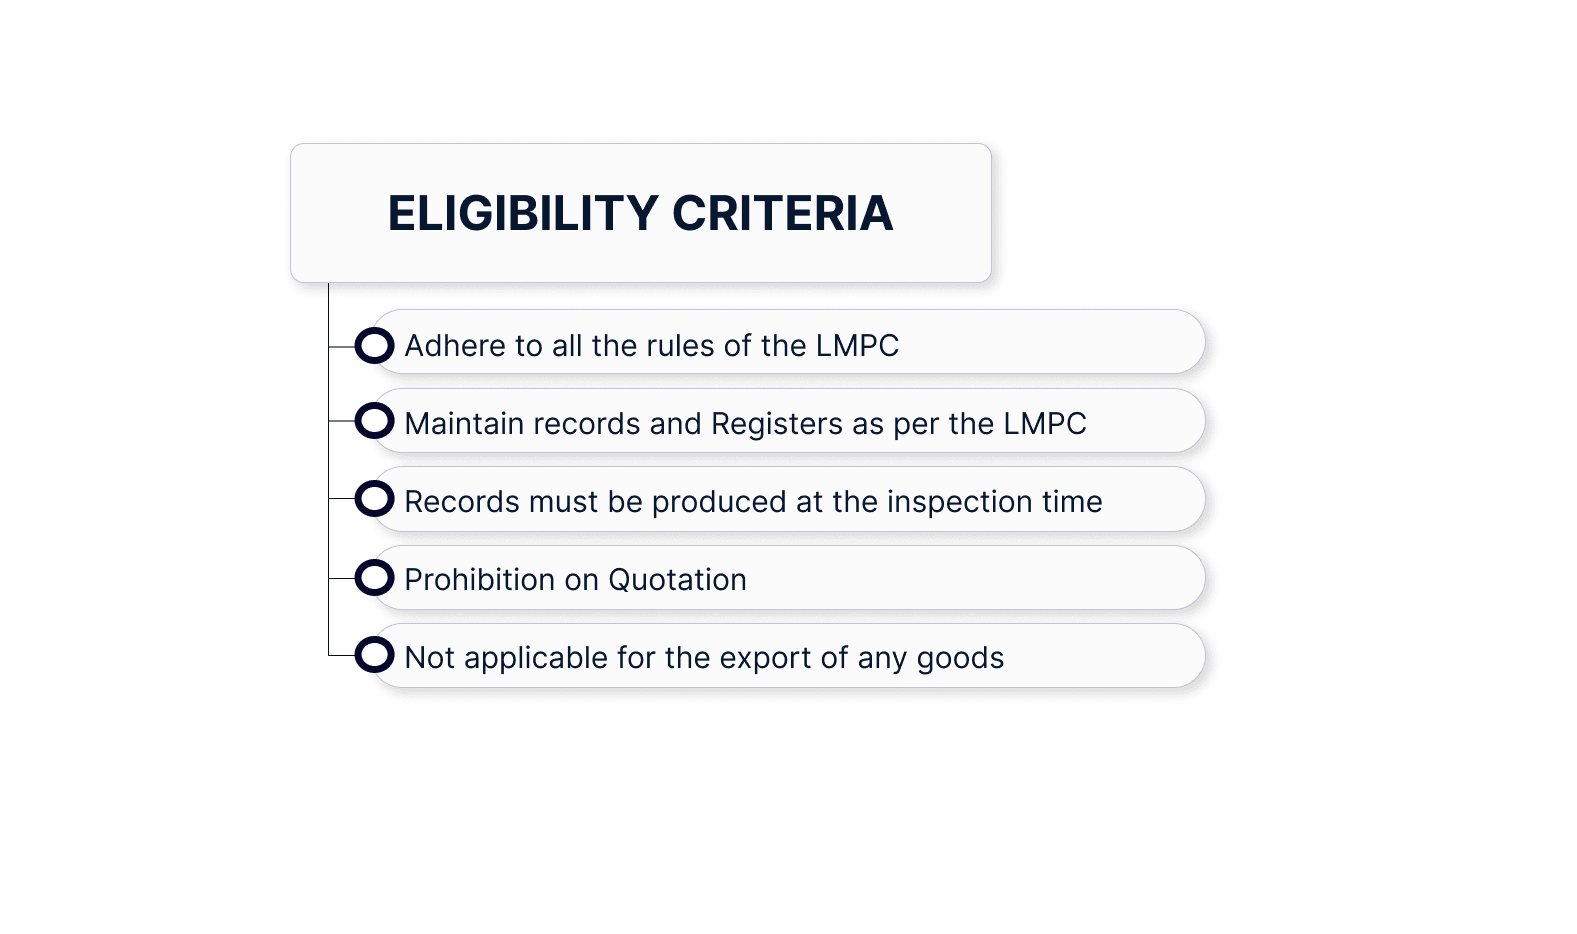 Eligibility Criteria for Packing License in India